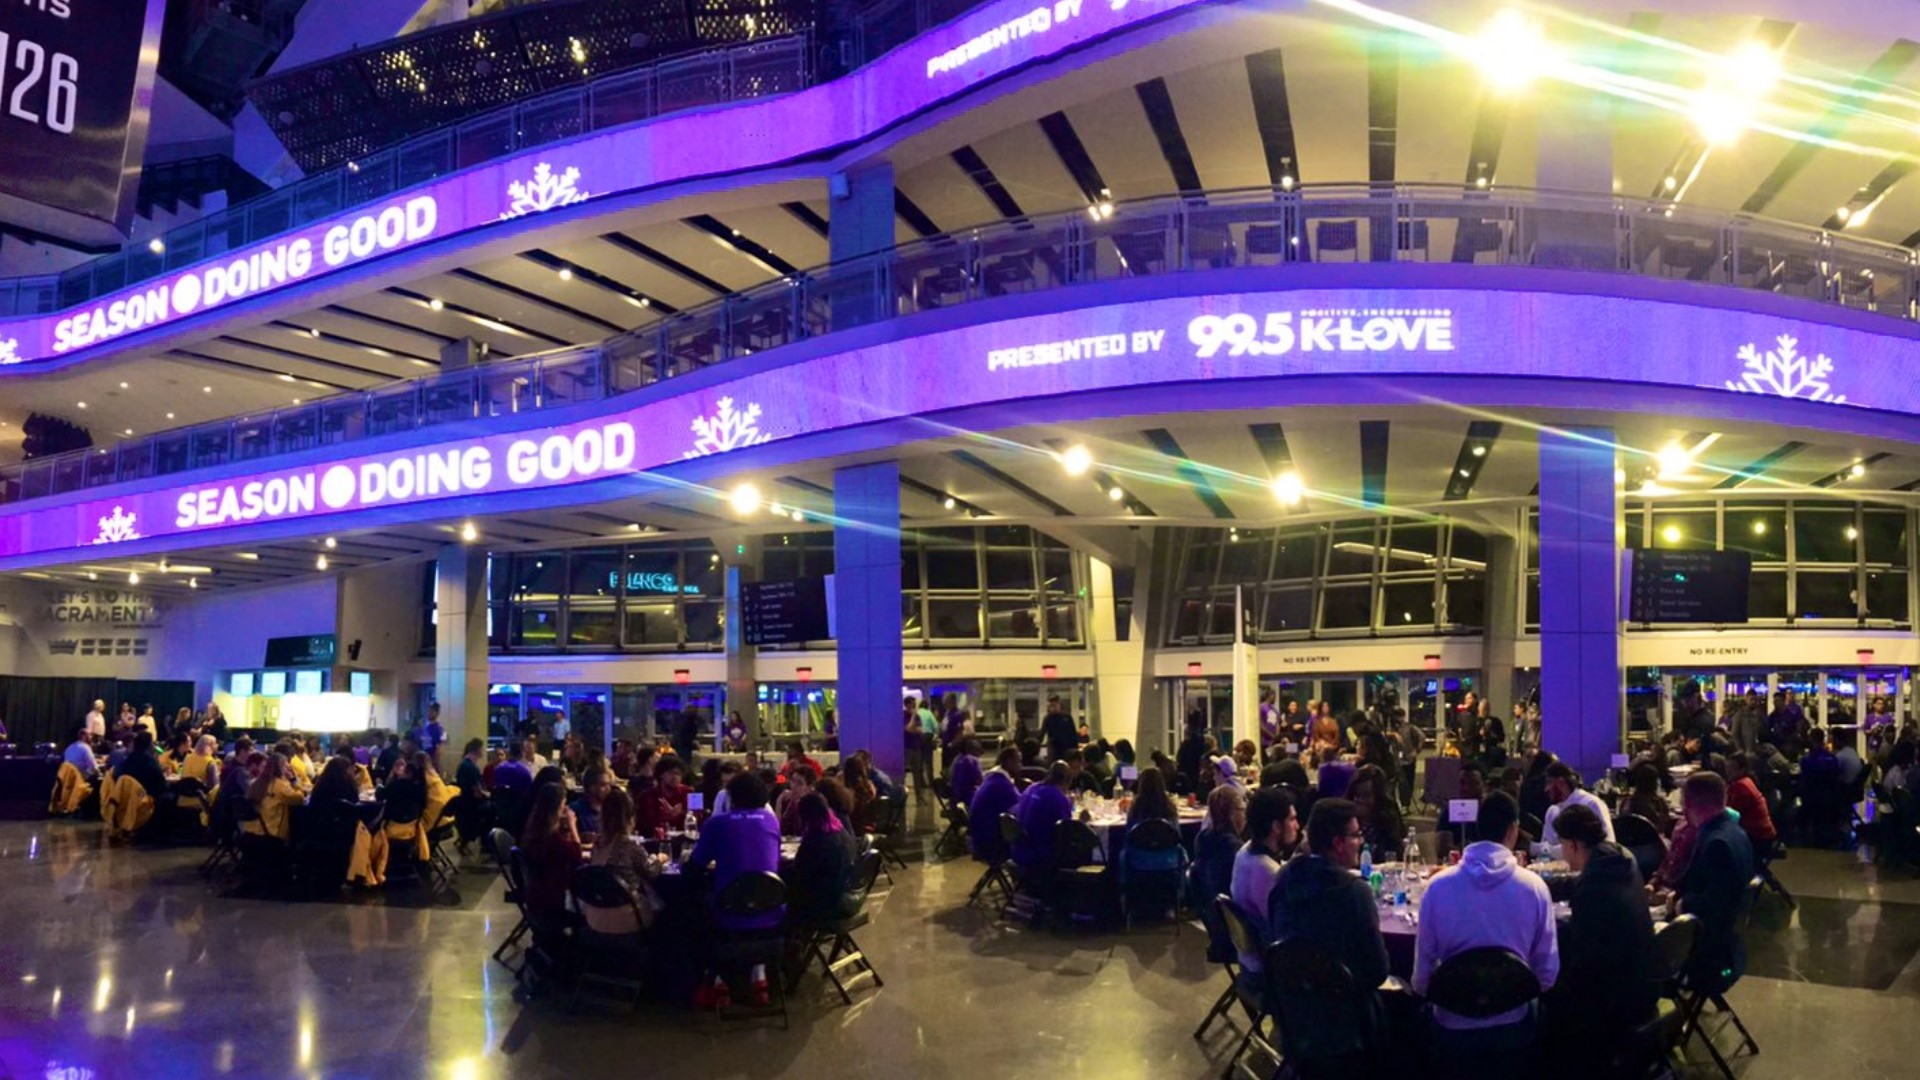 The Sacramento Kings are celebrating their 18th Season Of Doing Good in a big way -- with three scheduled events to give back to the Sacramento community.